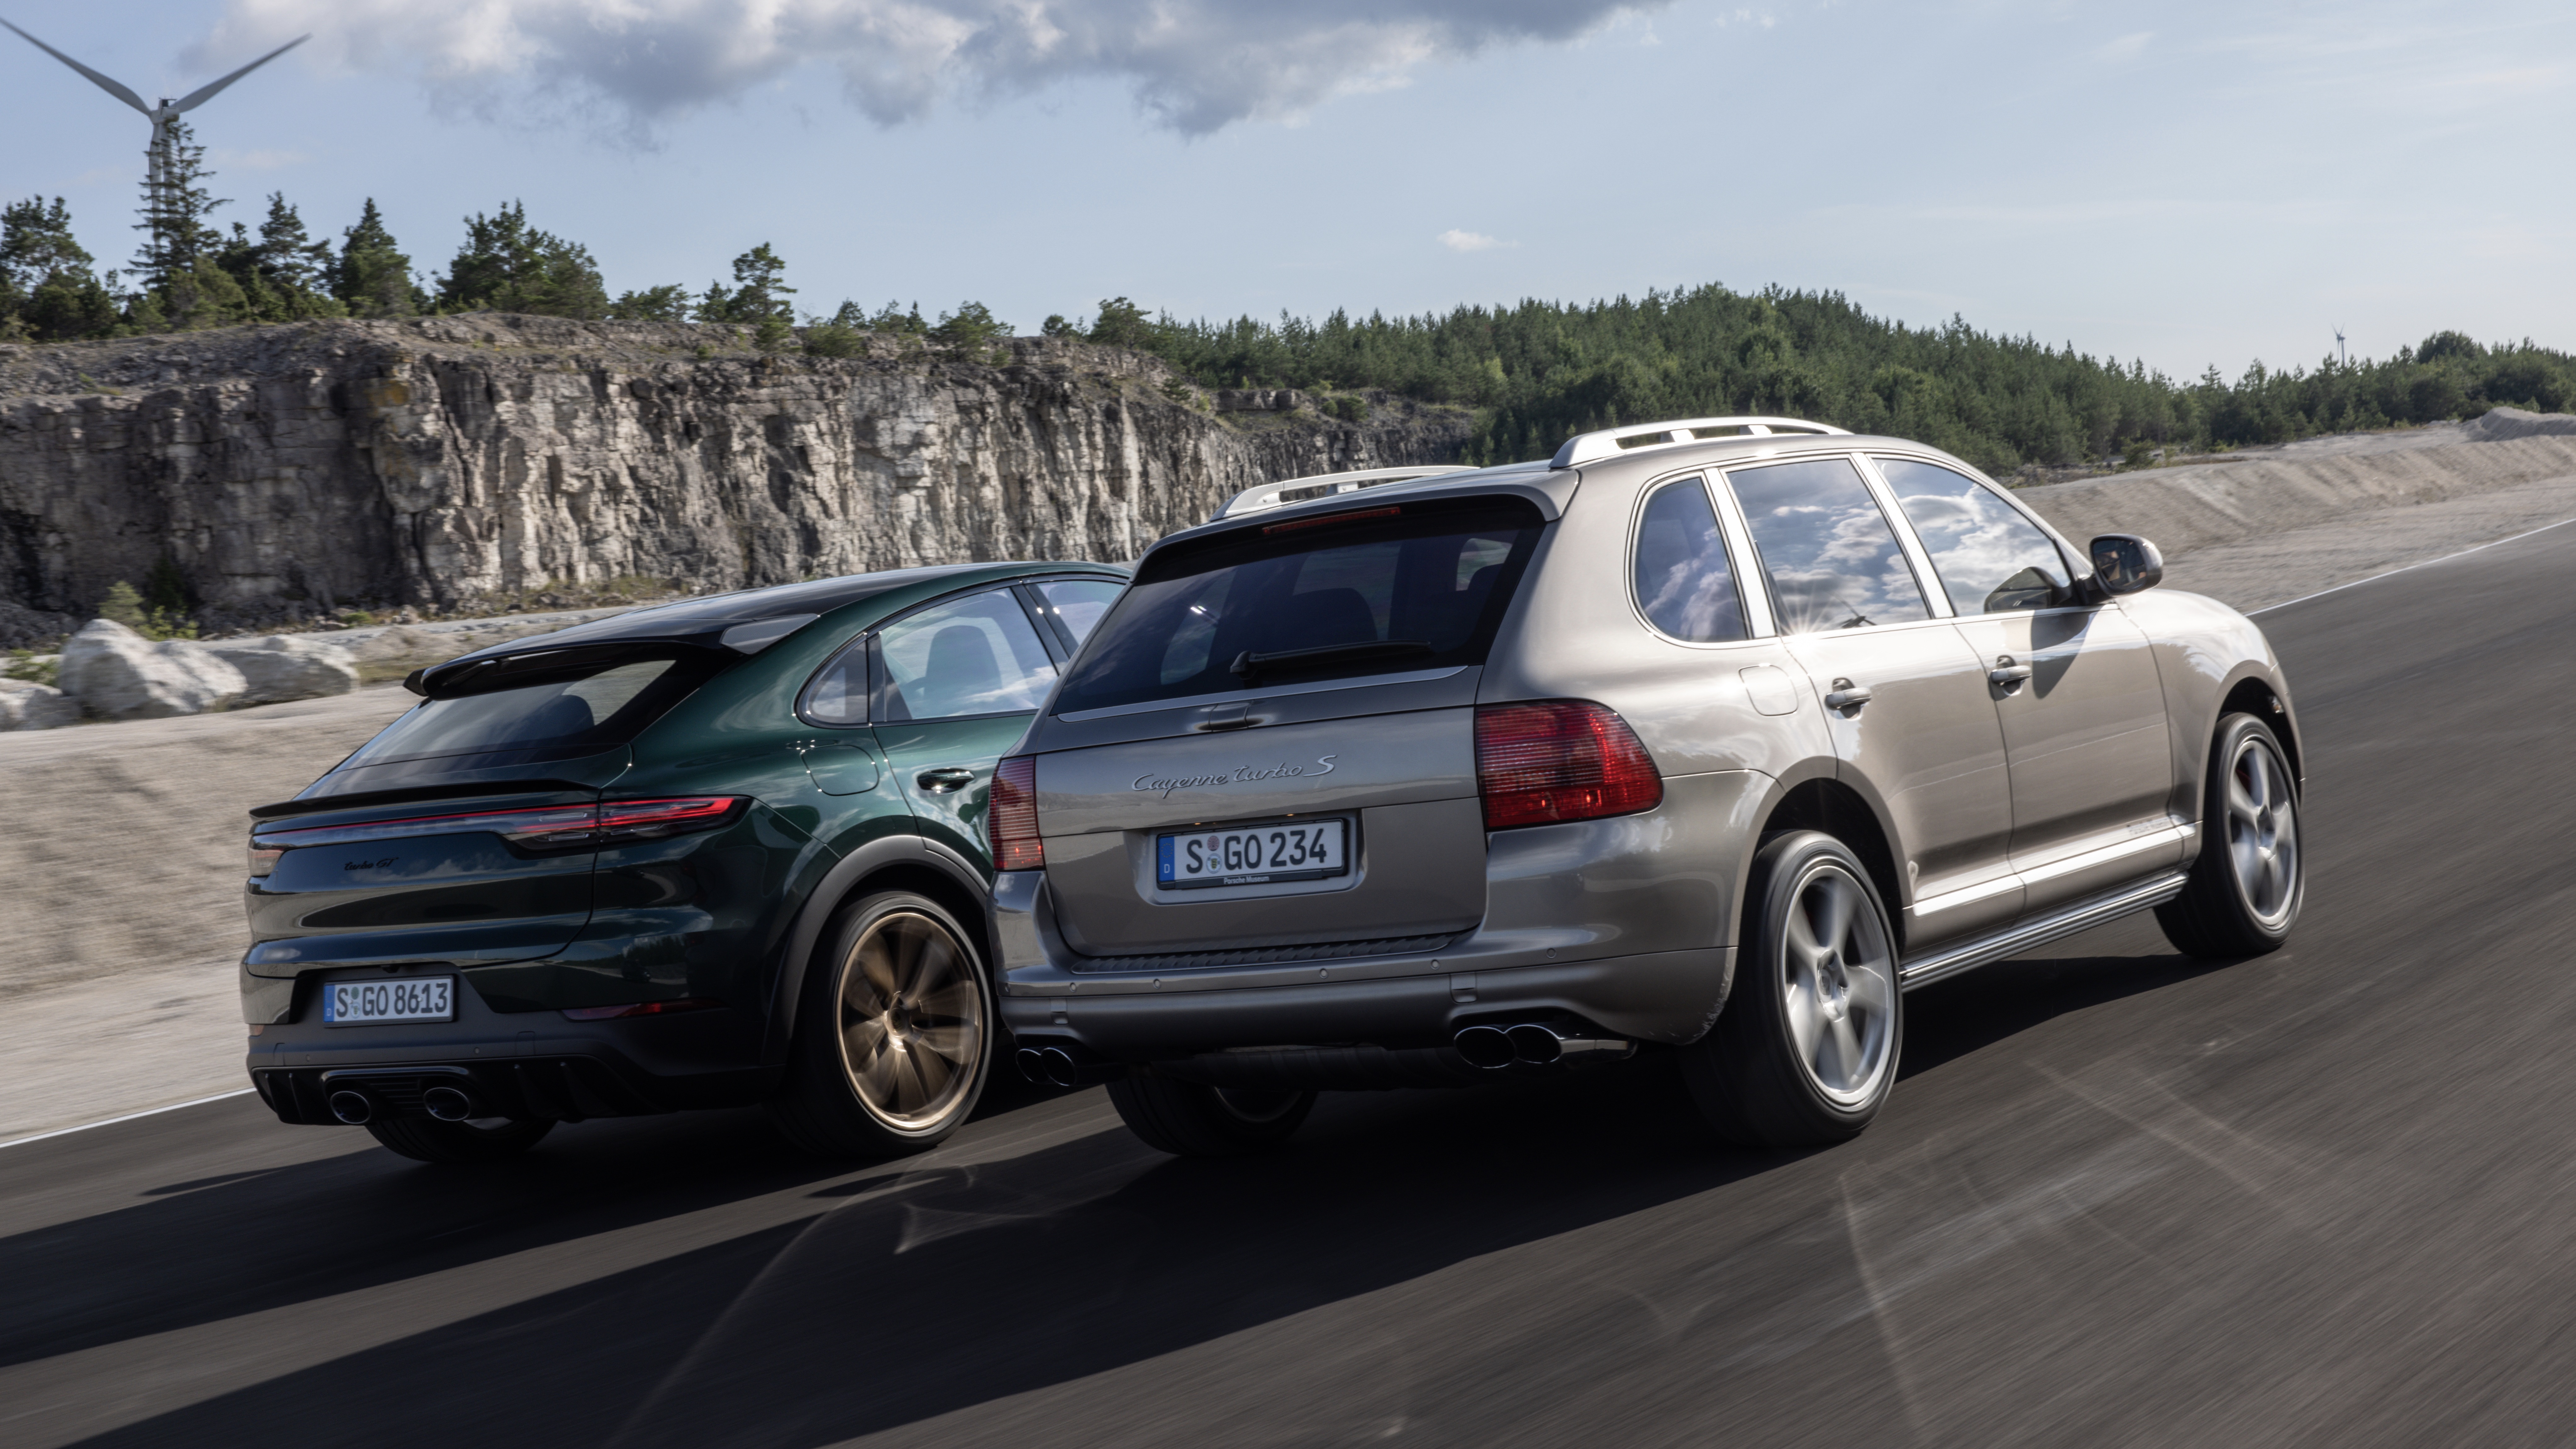 Two Porsche Cayenne SUVs driving side by side on road 